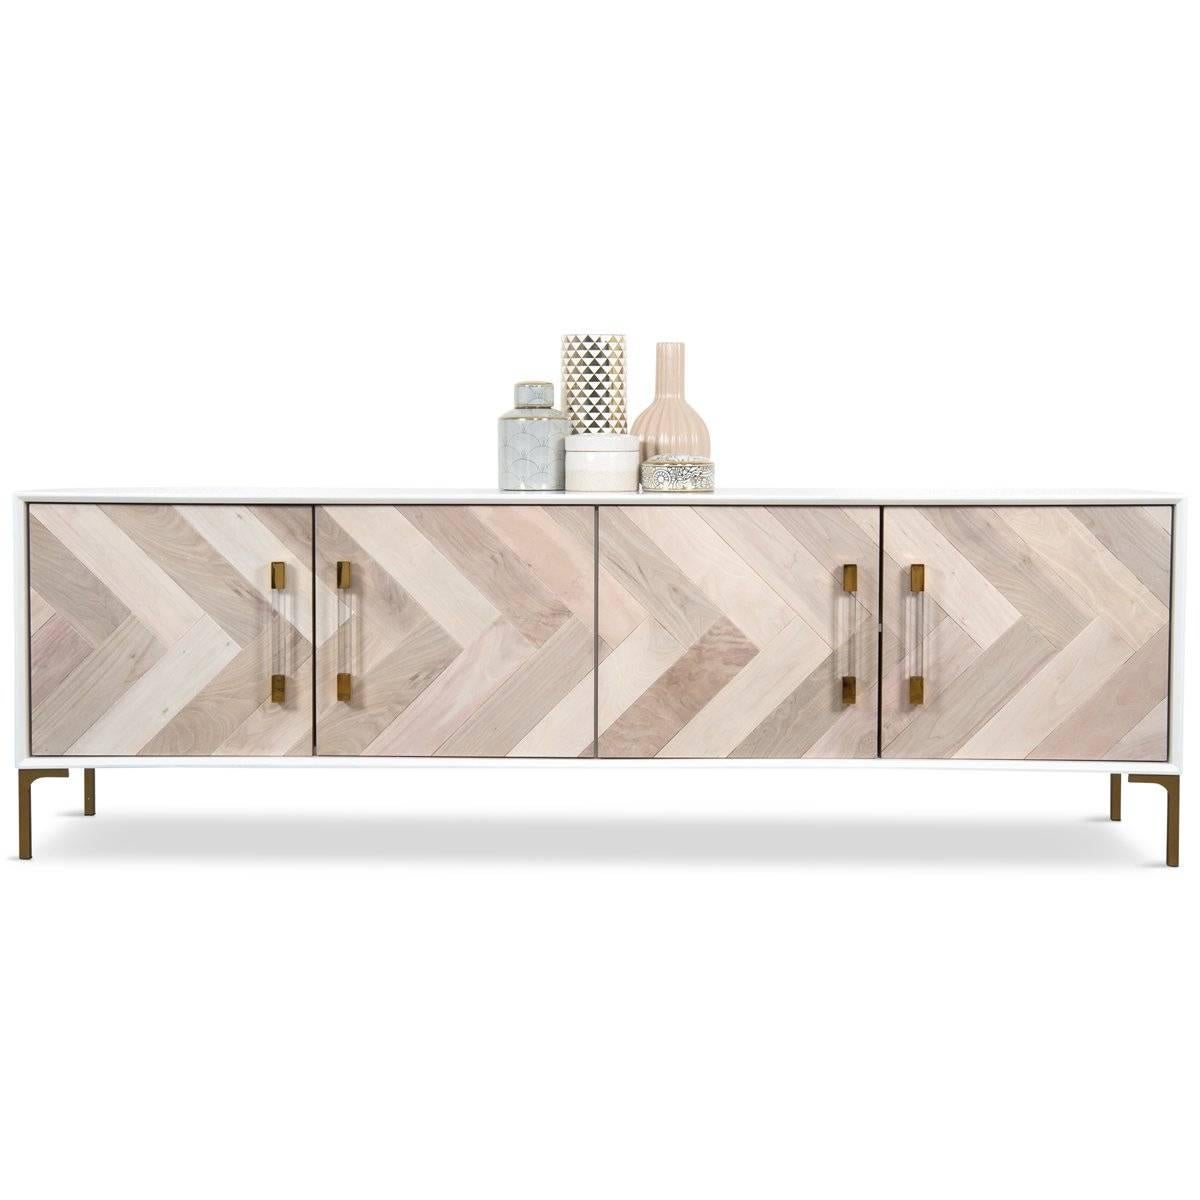 This four door credenza features hand cut bleached North American Walnut in a V shape pattern. With the matte white lacquer case finish and lucite brass hardware pulls, this piece would be a stunning addition to any space.
 
Dimensions:
84